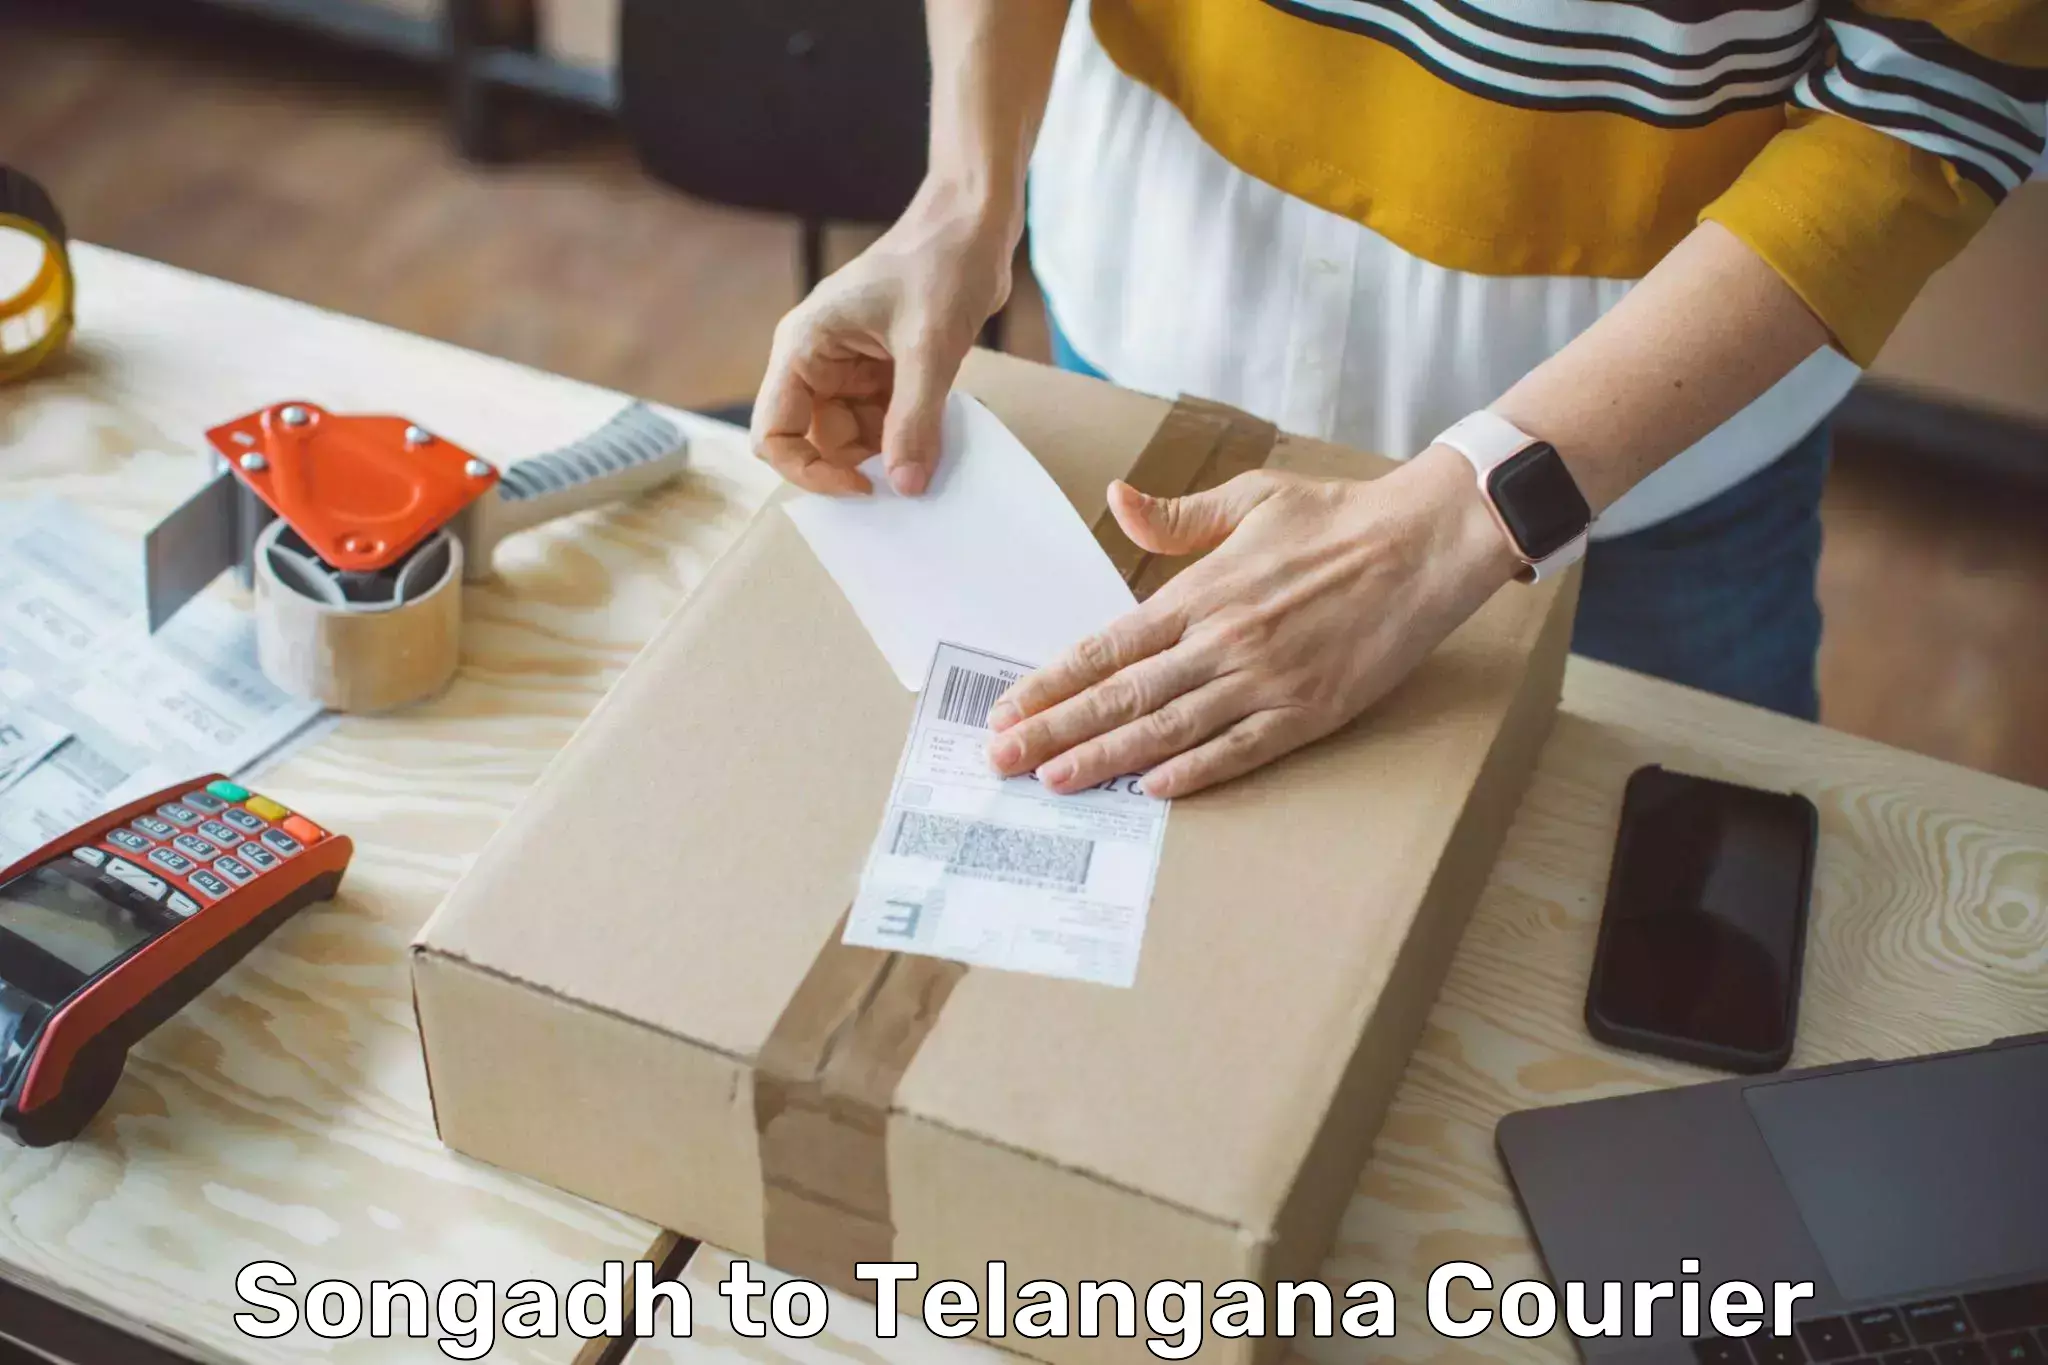 Premium courier solutions Songadh to Manneguda